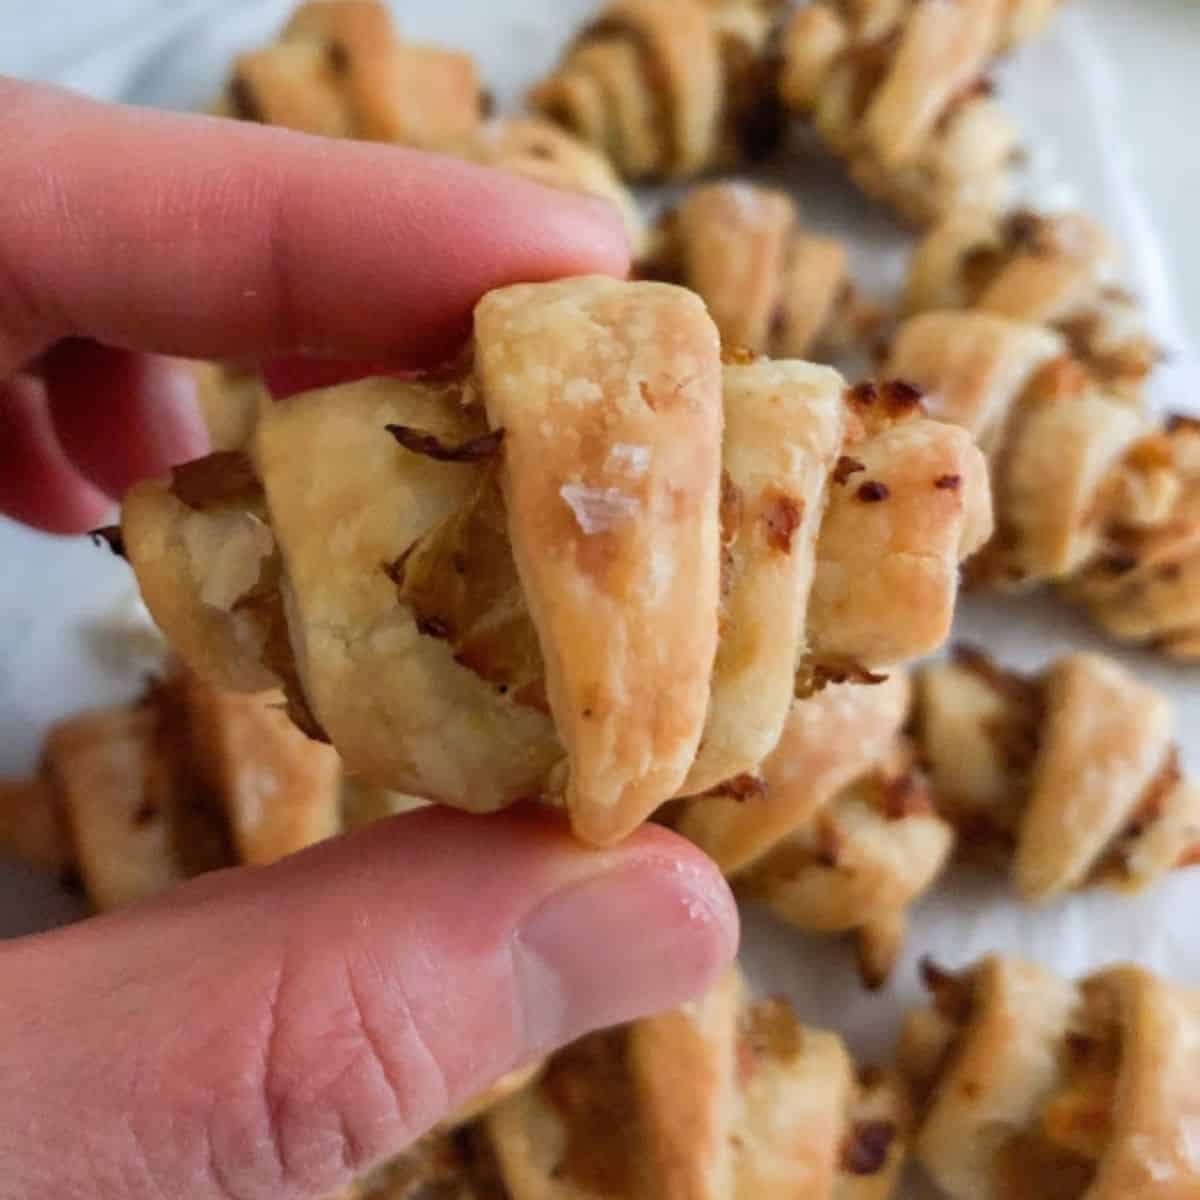 Hand holding baked rugelach with additional rugelach in the background on parchment paper.